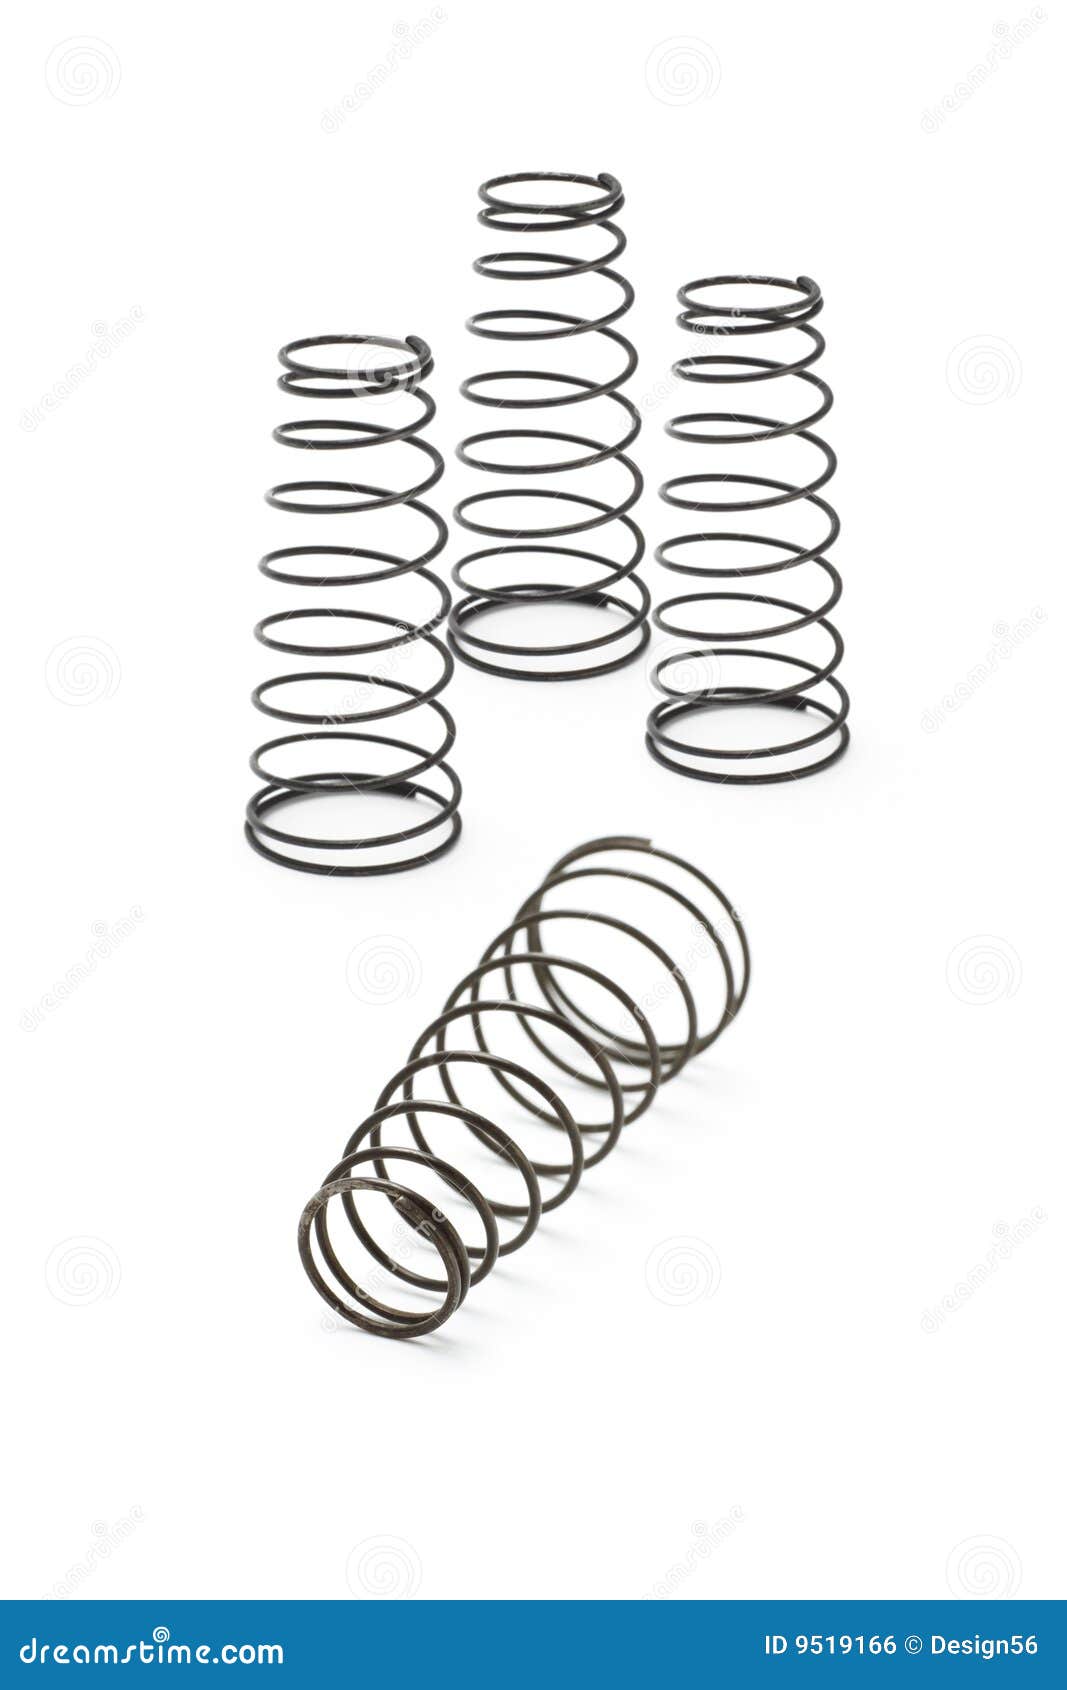 free clipart coil spring - photo #43